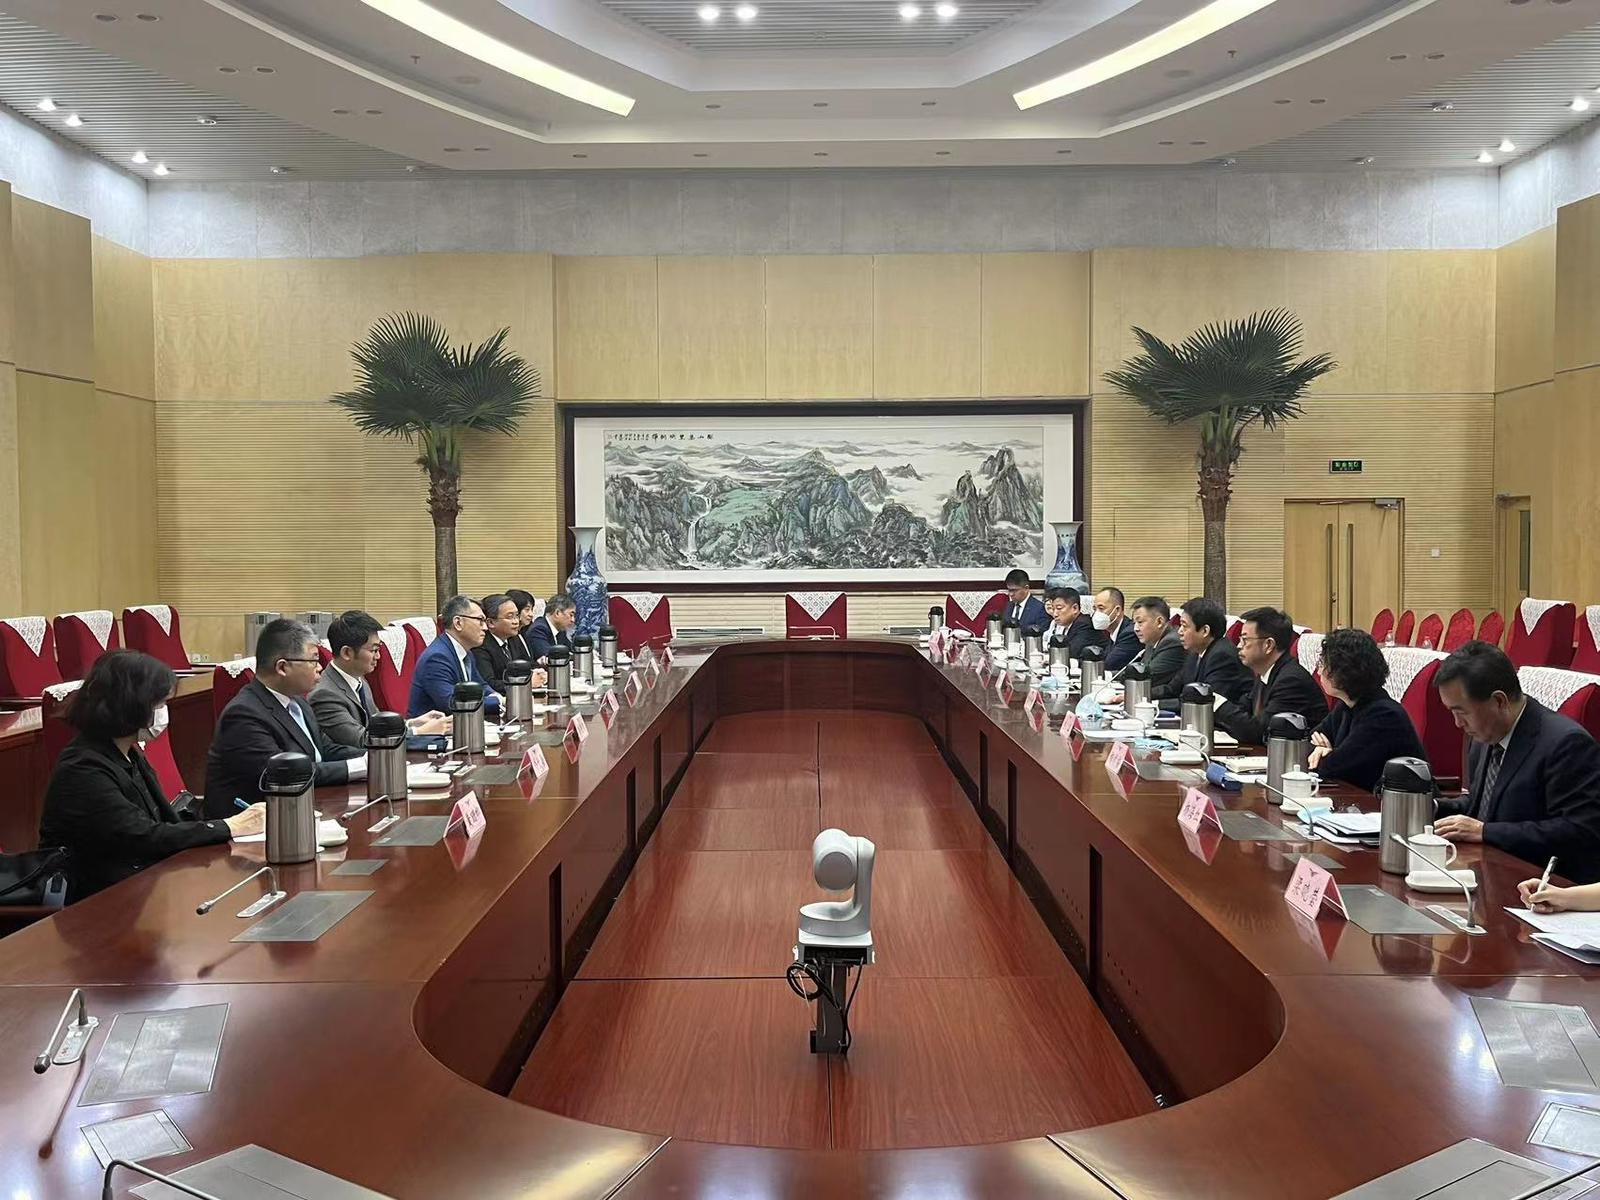 The Director-General of Civil Aviation, Mr Victor Liu, visited the Civil Aviation Administration of China (CAAC) yesterday (March 29). Photo shows Mr Liu (fourth left) and Deputy Administrator of the CAAC Mr Cui Xiaofeng (fourth right) exchanging views on matters of common interest of the Mainland and Hong Kong civil aviation sectors.